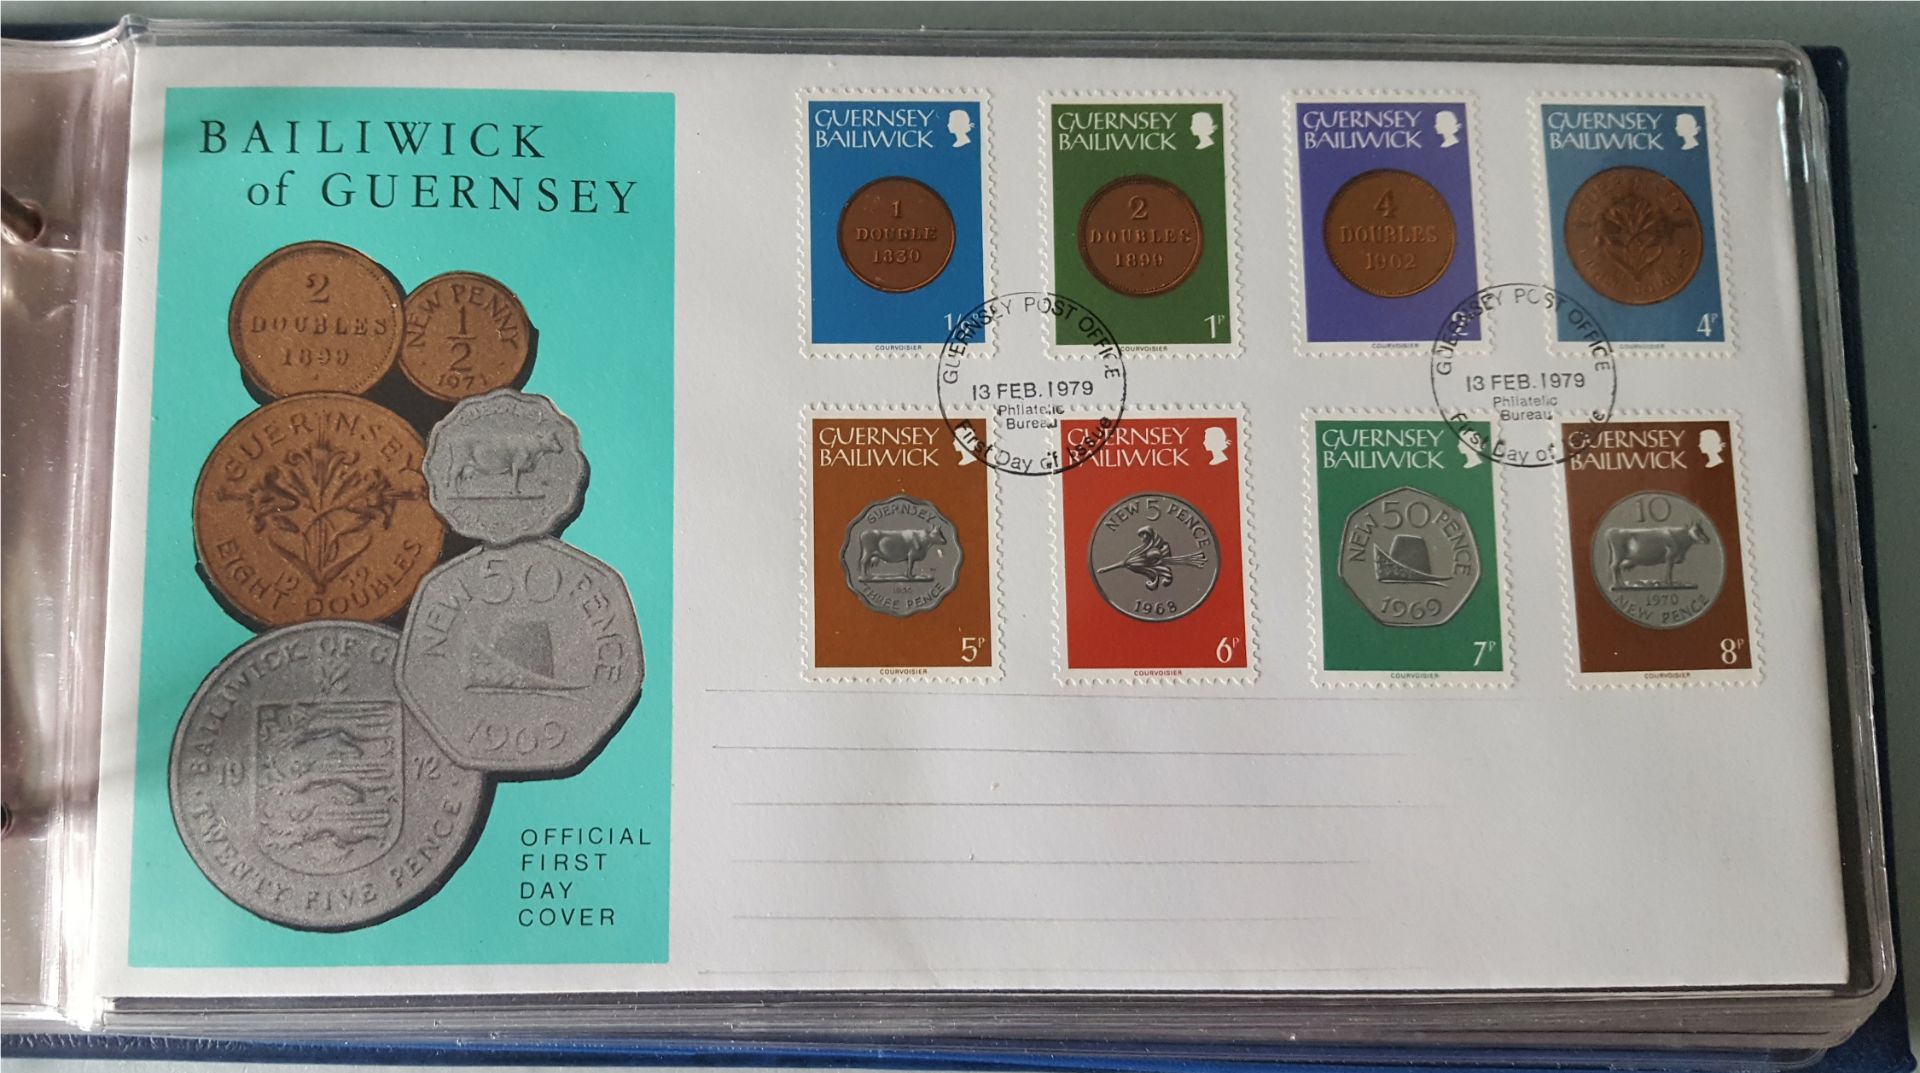 Vintage Retro Collection of First Day Covers Bailiwick of Guernsey 10 FDC's In Folder c1970's - Image 3 of 5